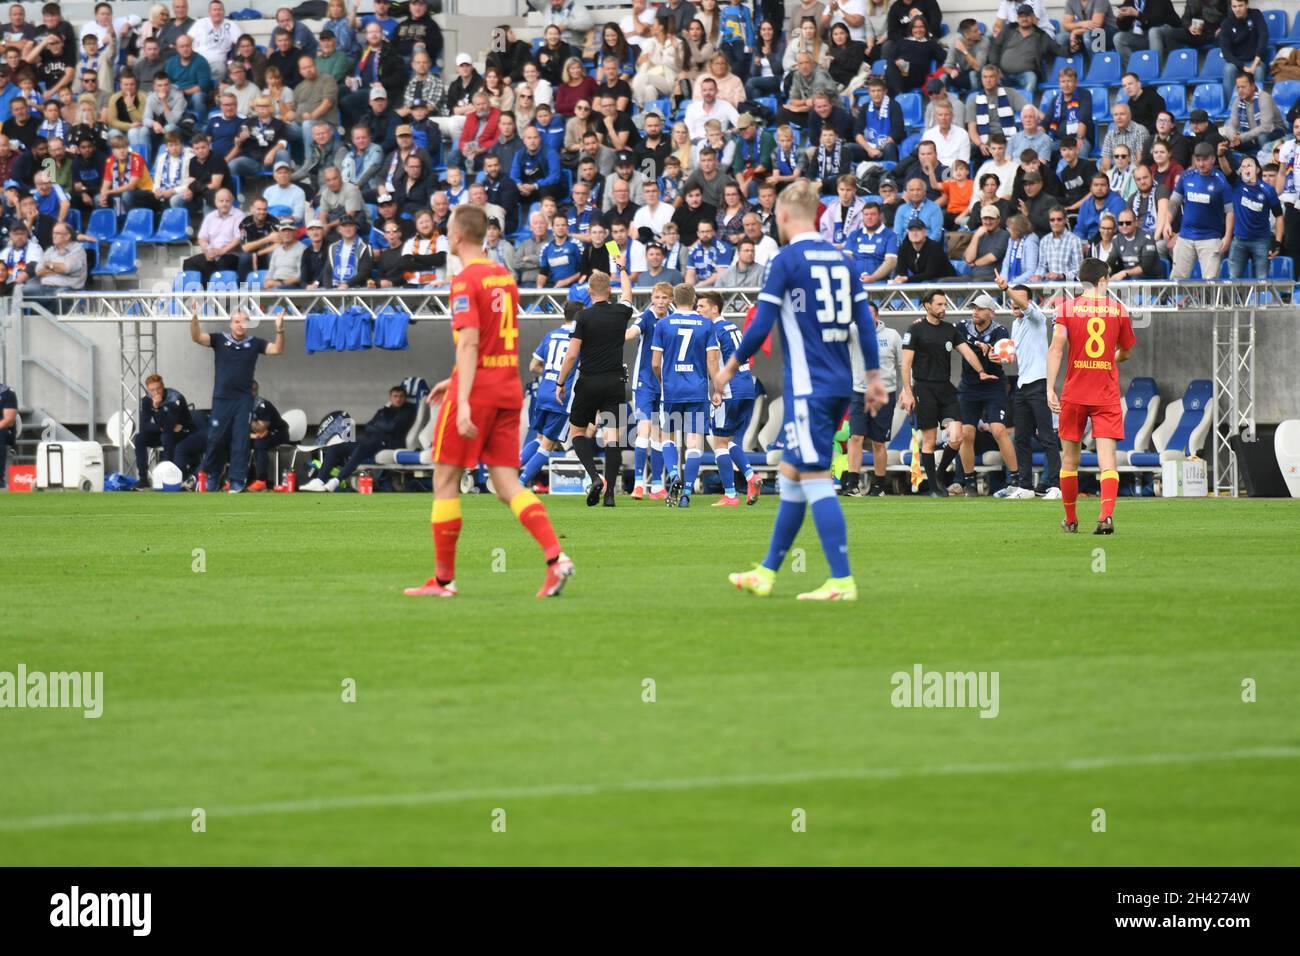 KSC second league match against SC paderborn 2:4 in Wildparkstadion  Karlsruhe 31. October 2021 Karlsruher SC Stock Photo - Alamy